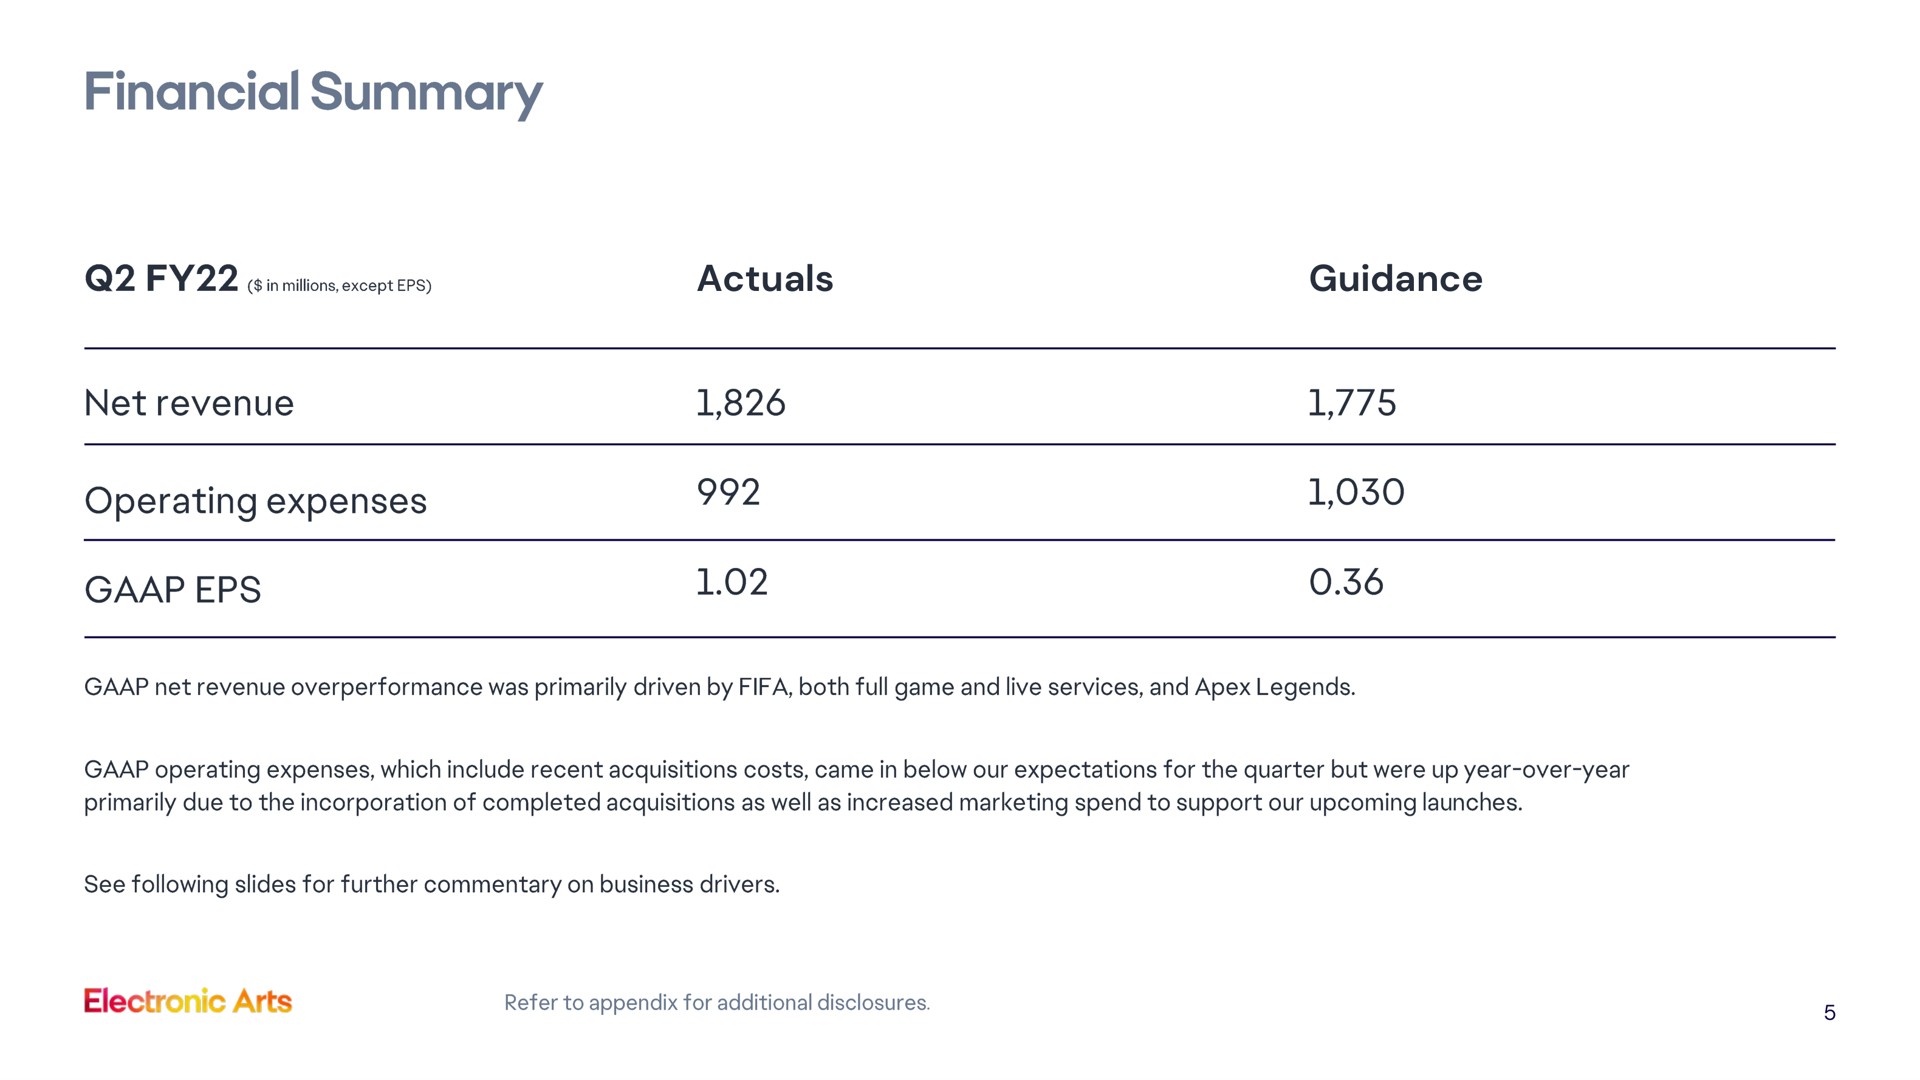 guidance financial summary operating expenses | Electronic Arts